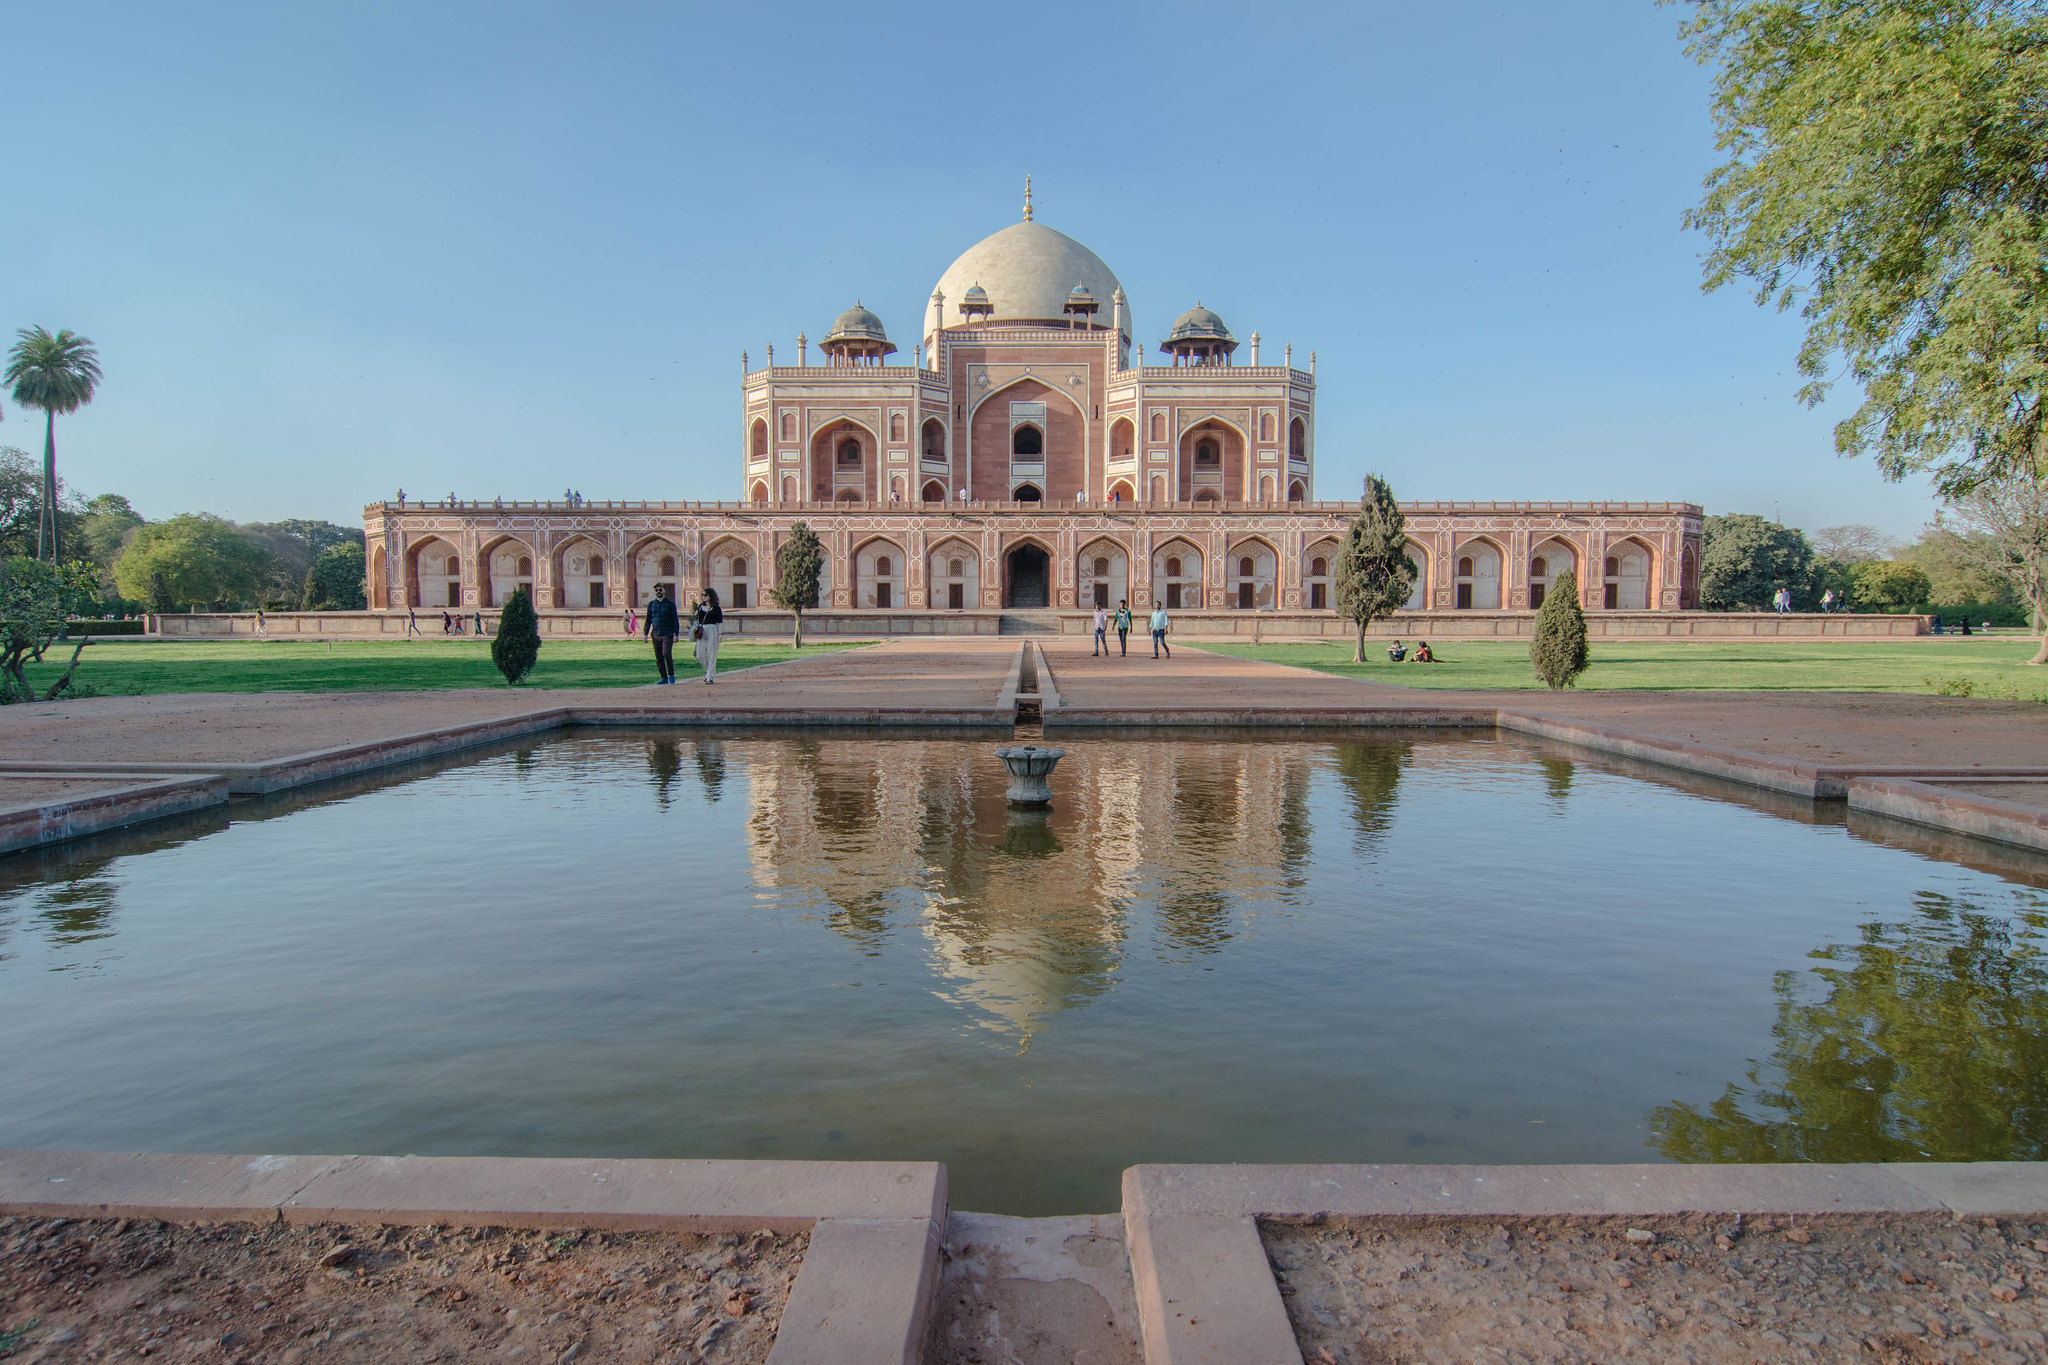 Humayun's Tomb and it's reflection in water